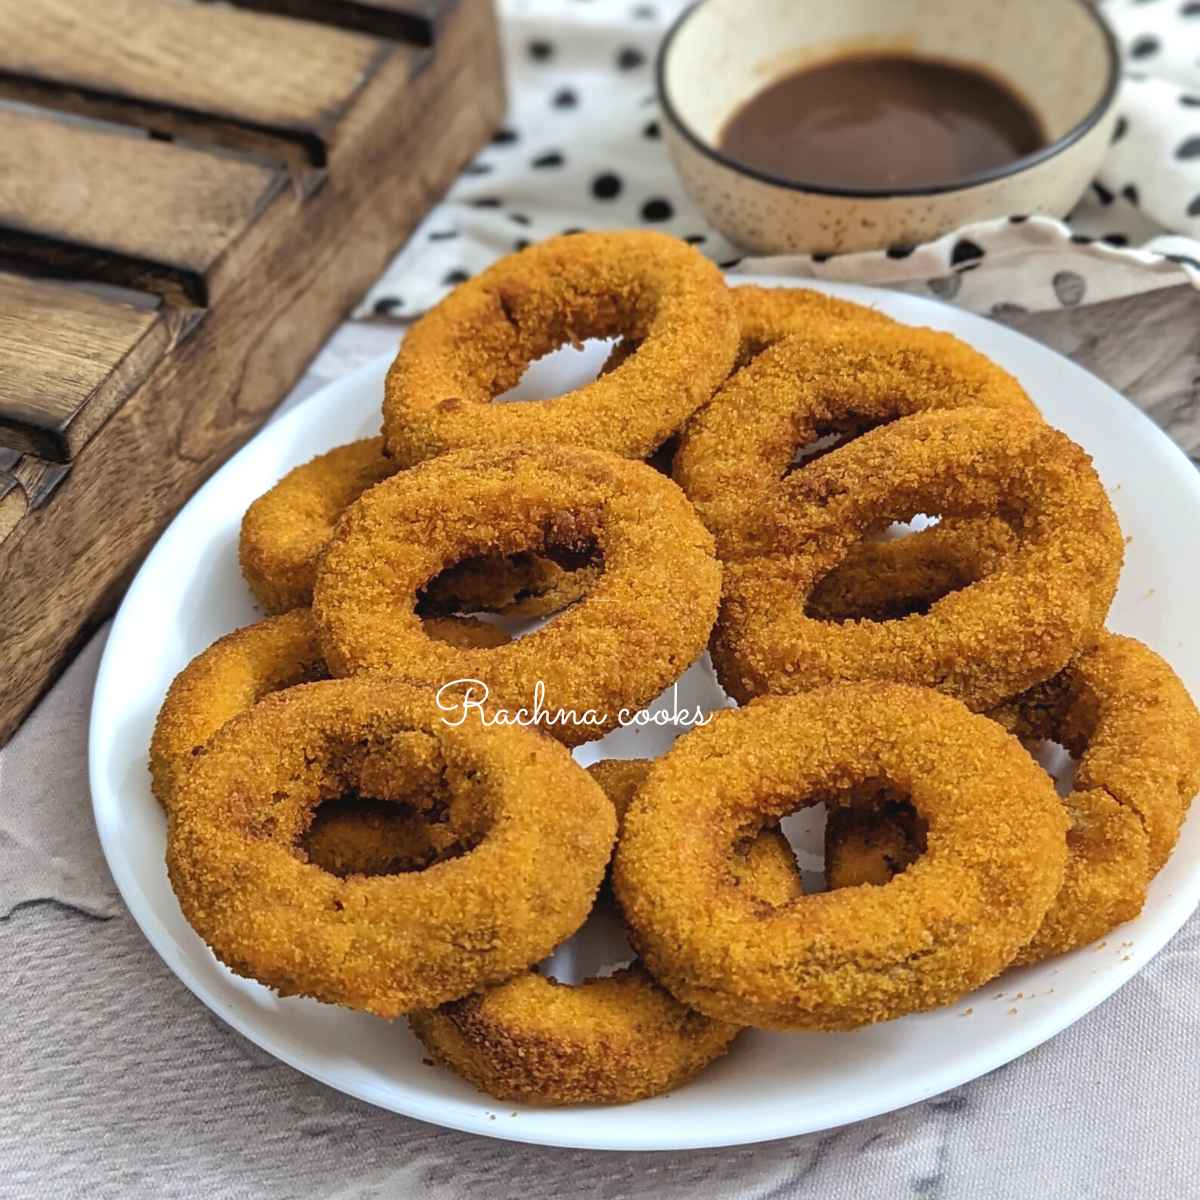 Frozen onion rings on a white plate